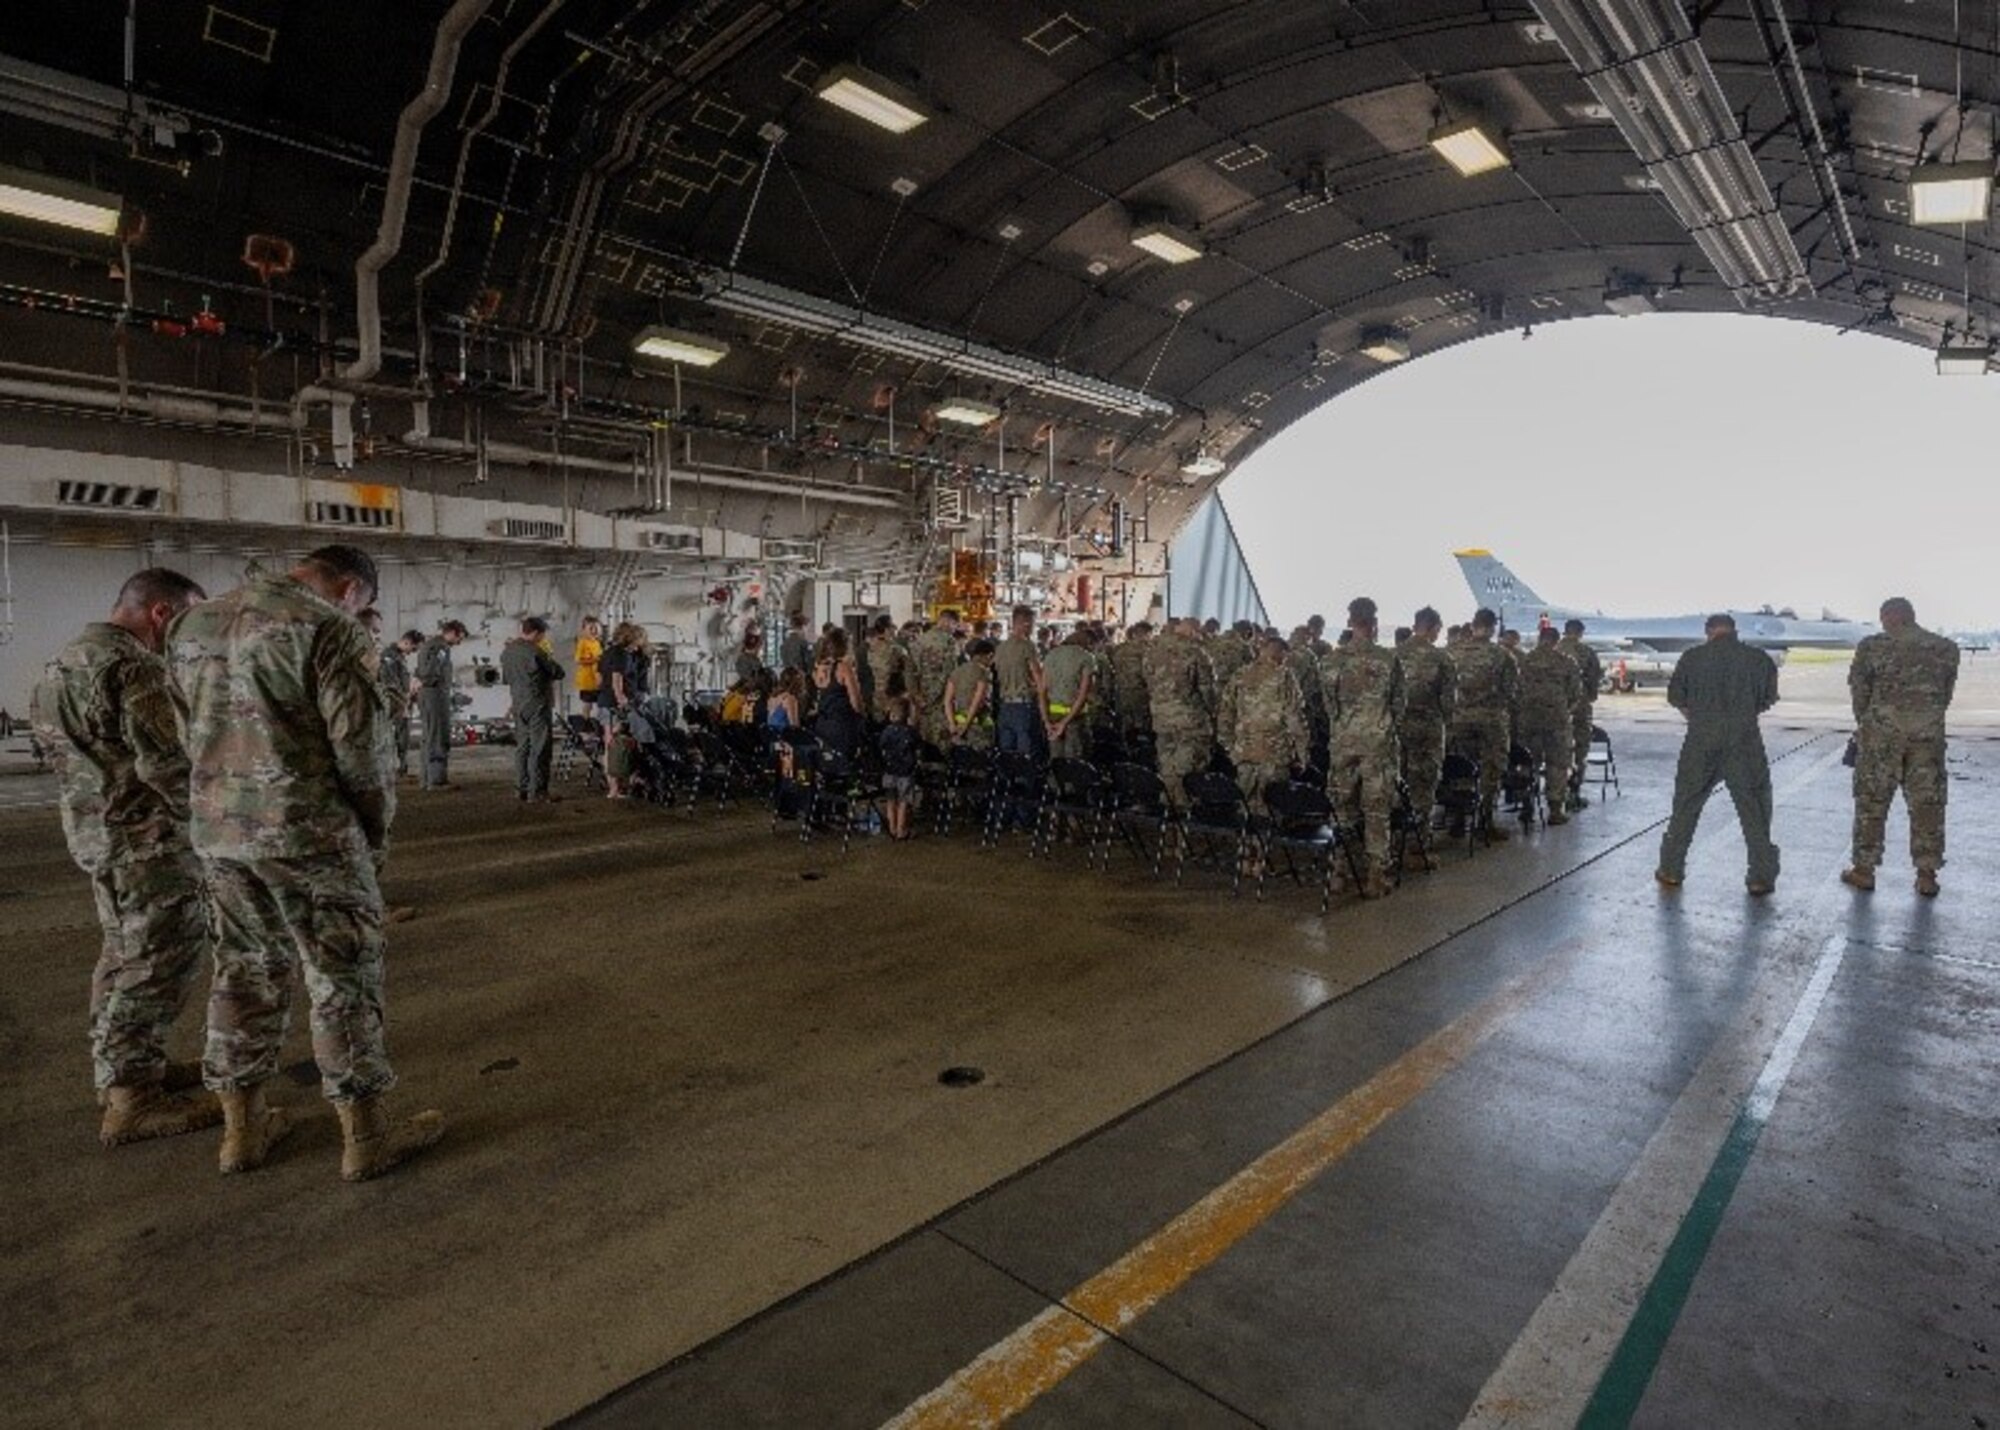 Airmen and families listening to an invocation during a ceremony in a hanger.